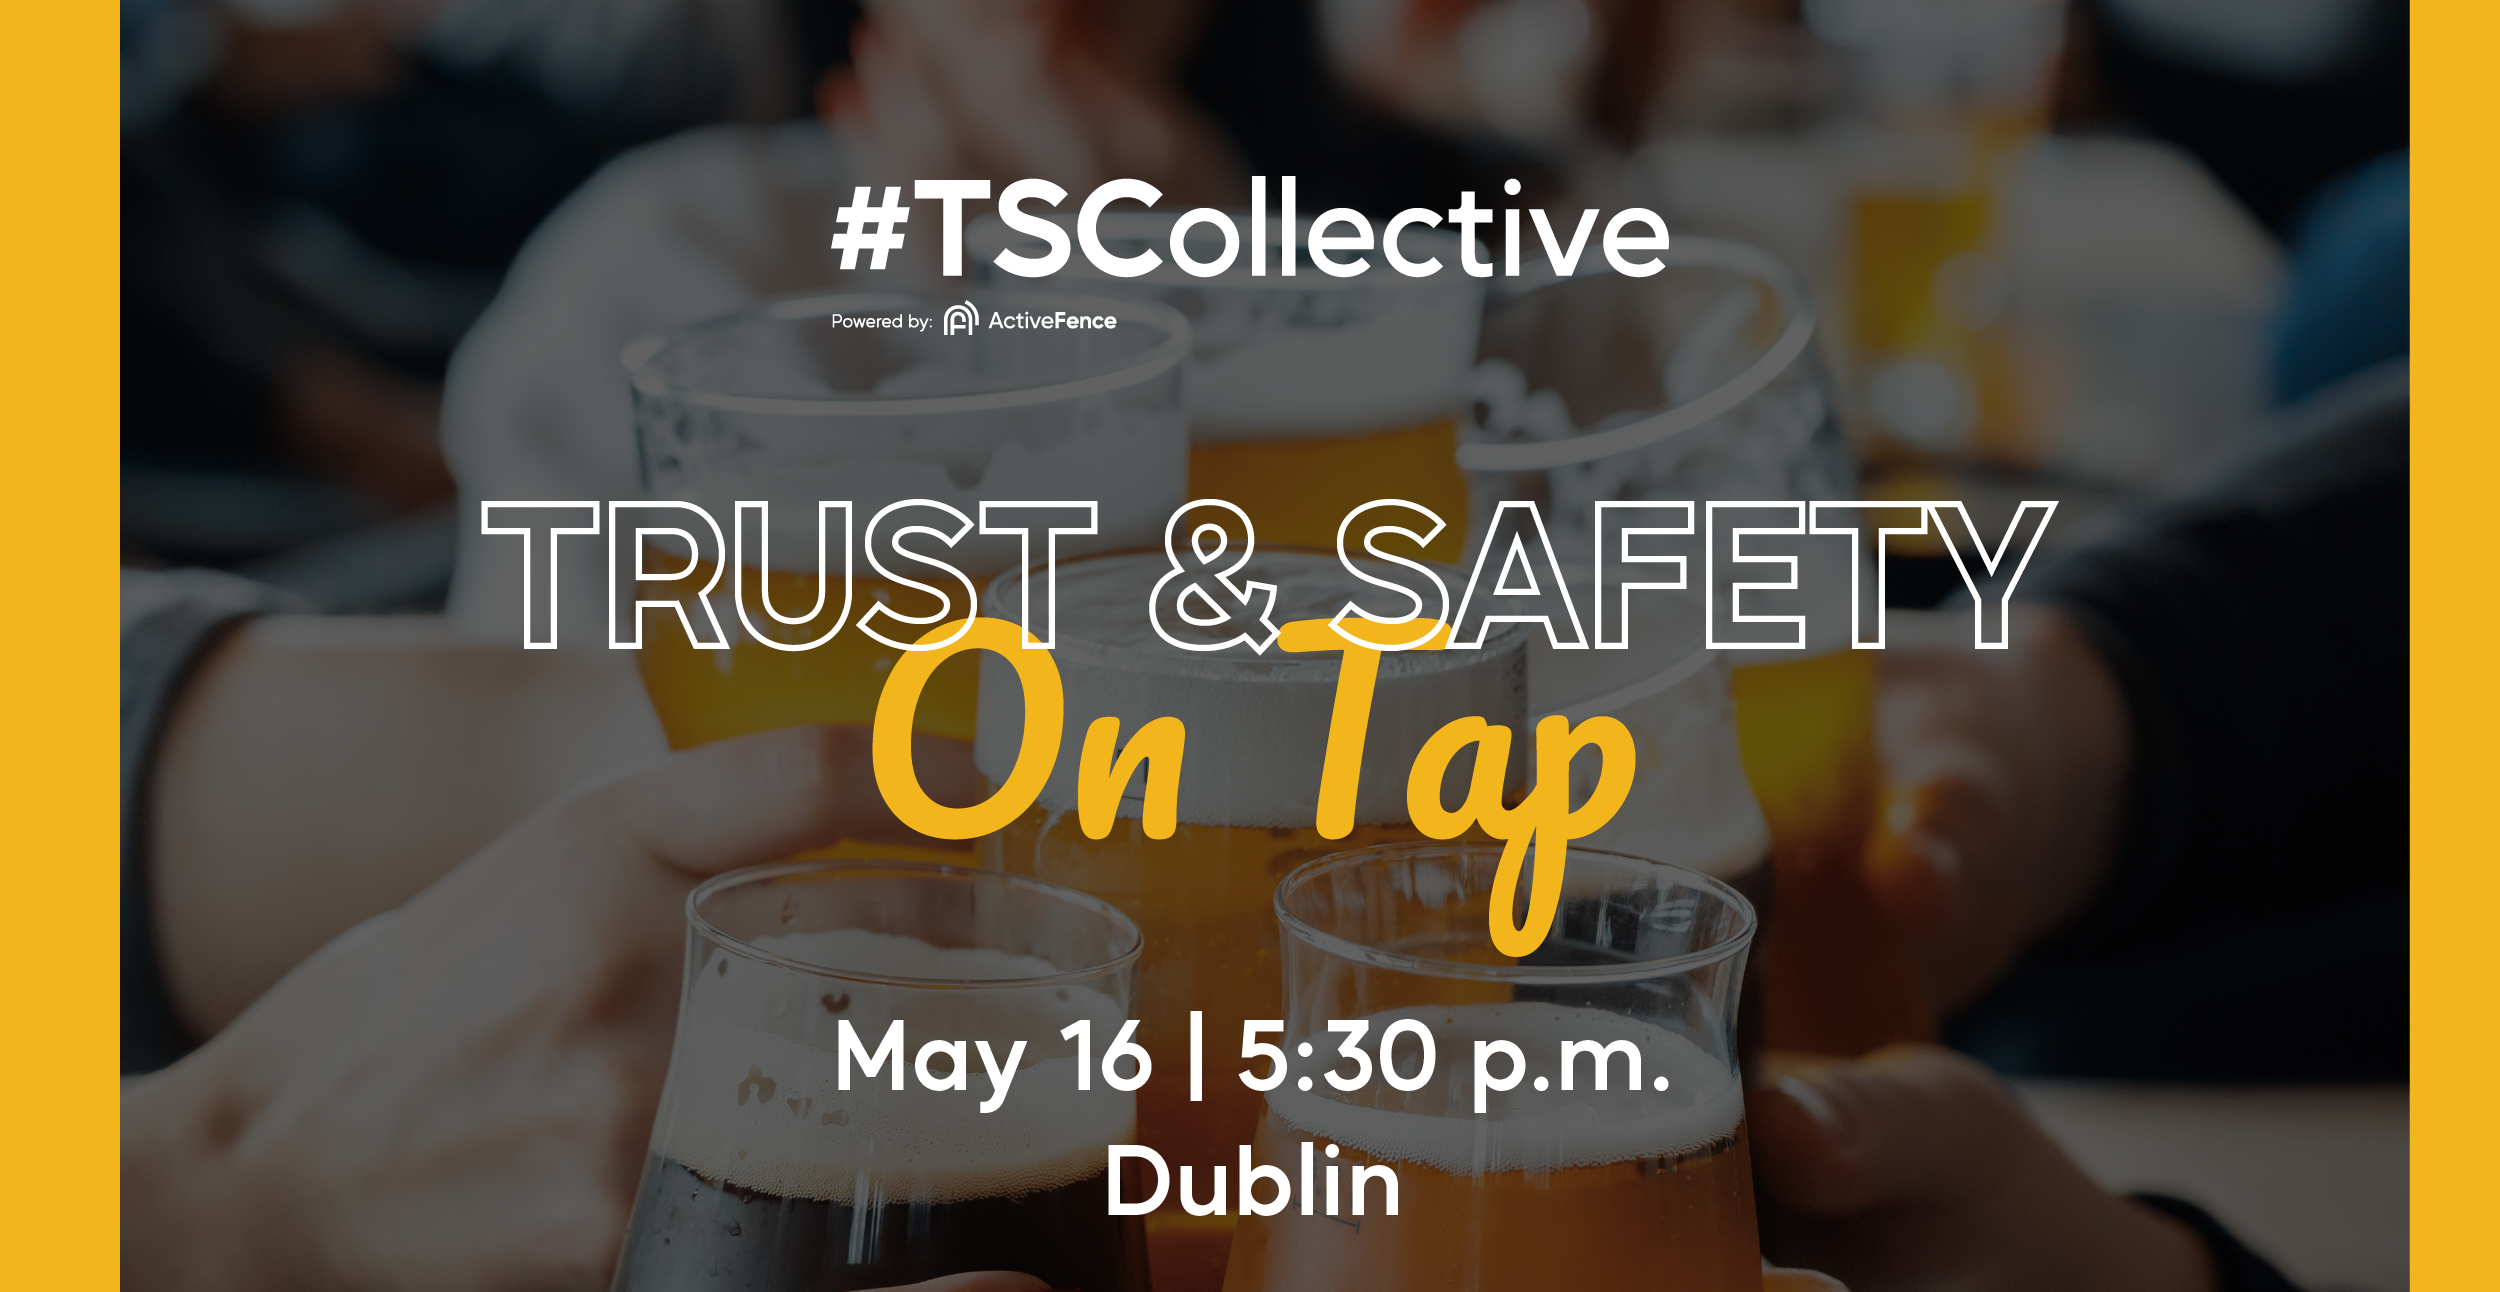 Promotional image for the event 'Trust & Safety On Tap' organized by ActiveFence, featuring people clinking glasses of beer, scheduled for May 16 at 5:30 p.m. in Dublin.